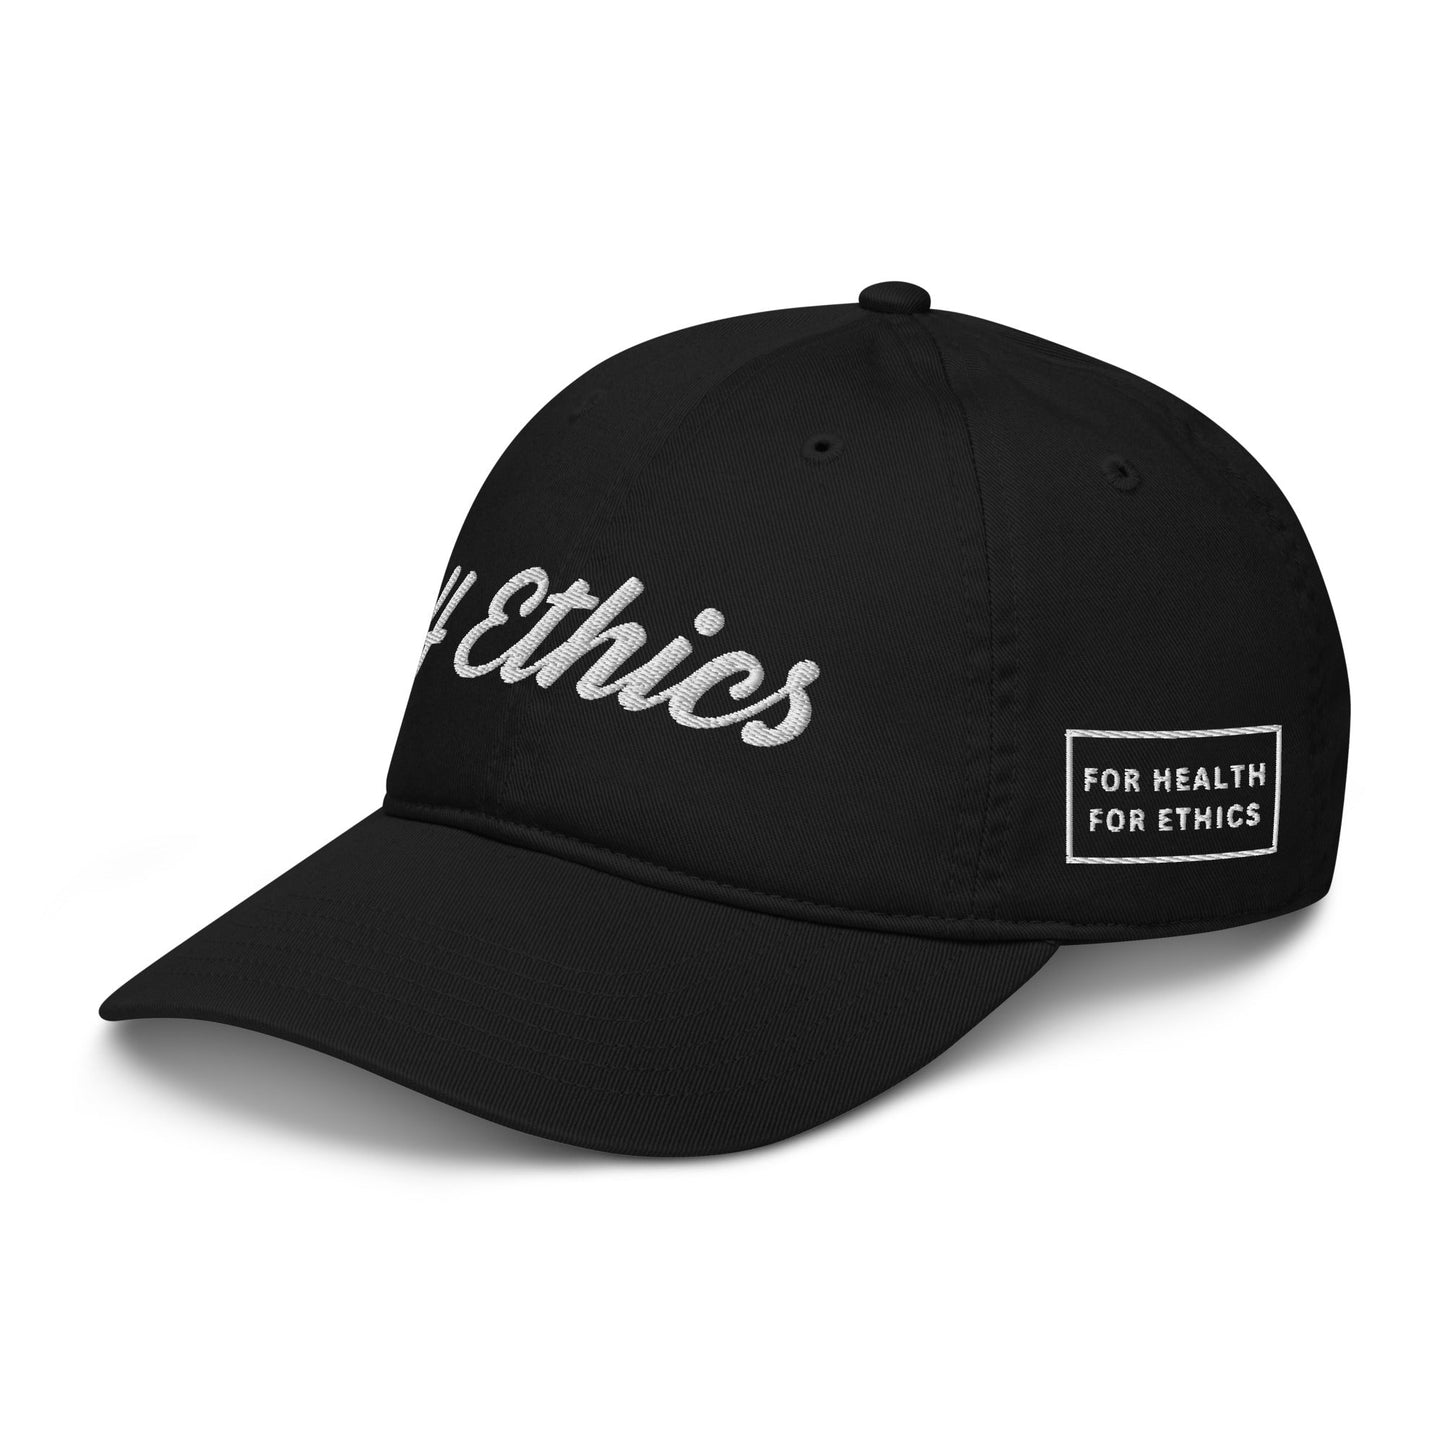 4 Ethics Organic Hat - For Health For Ethics - Black other side